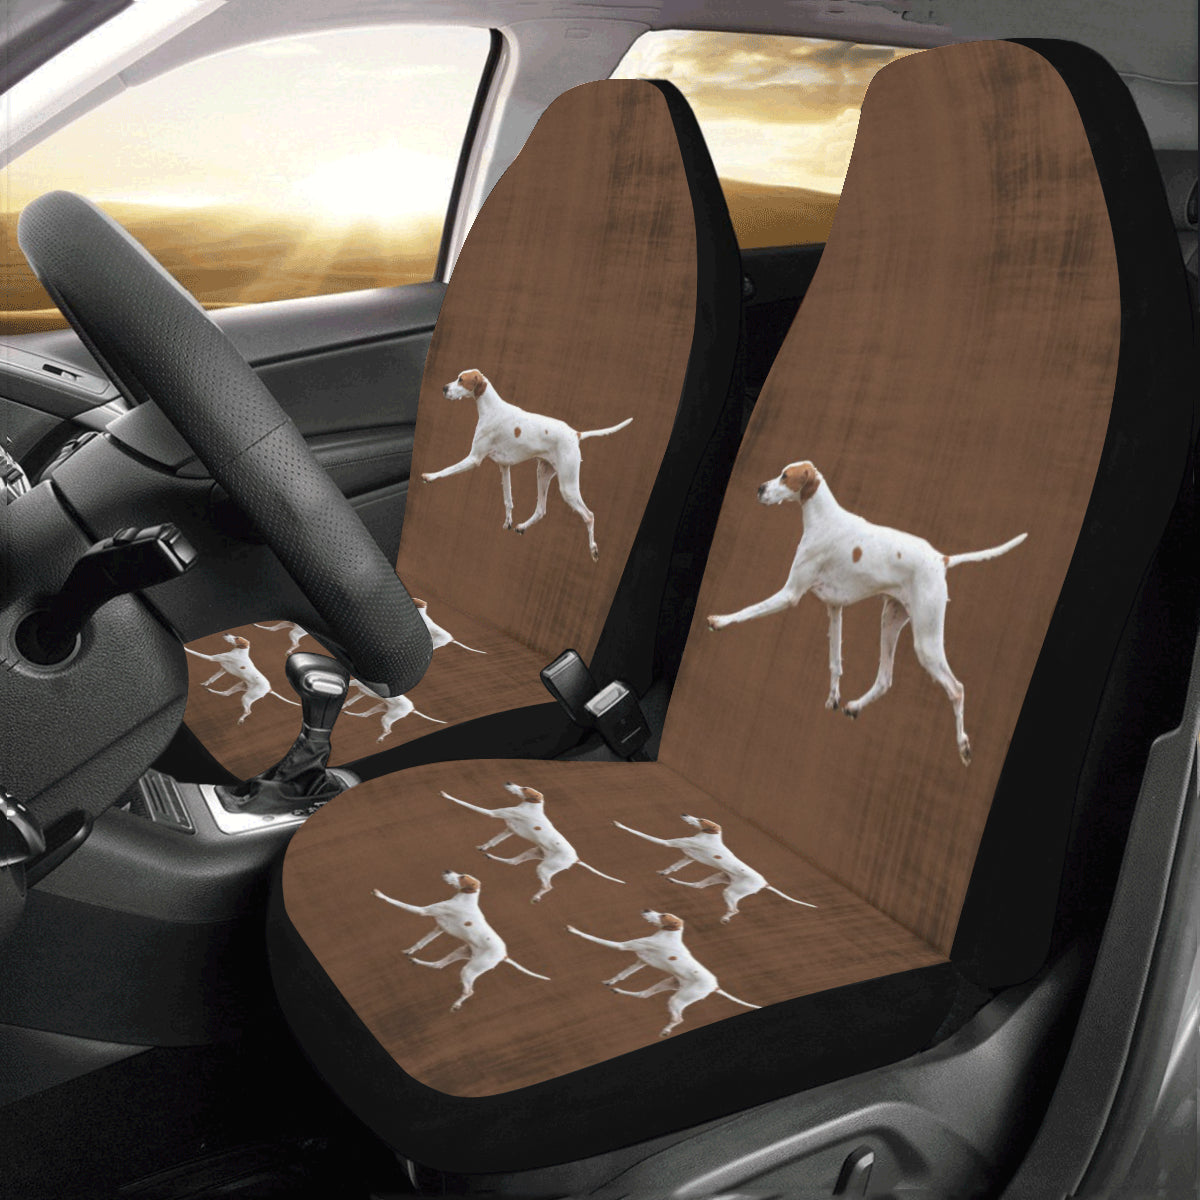 English Pointer Car Seat Covers (Set of 2)